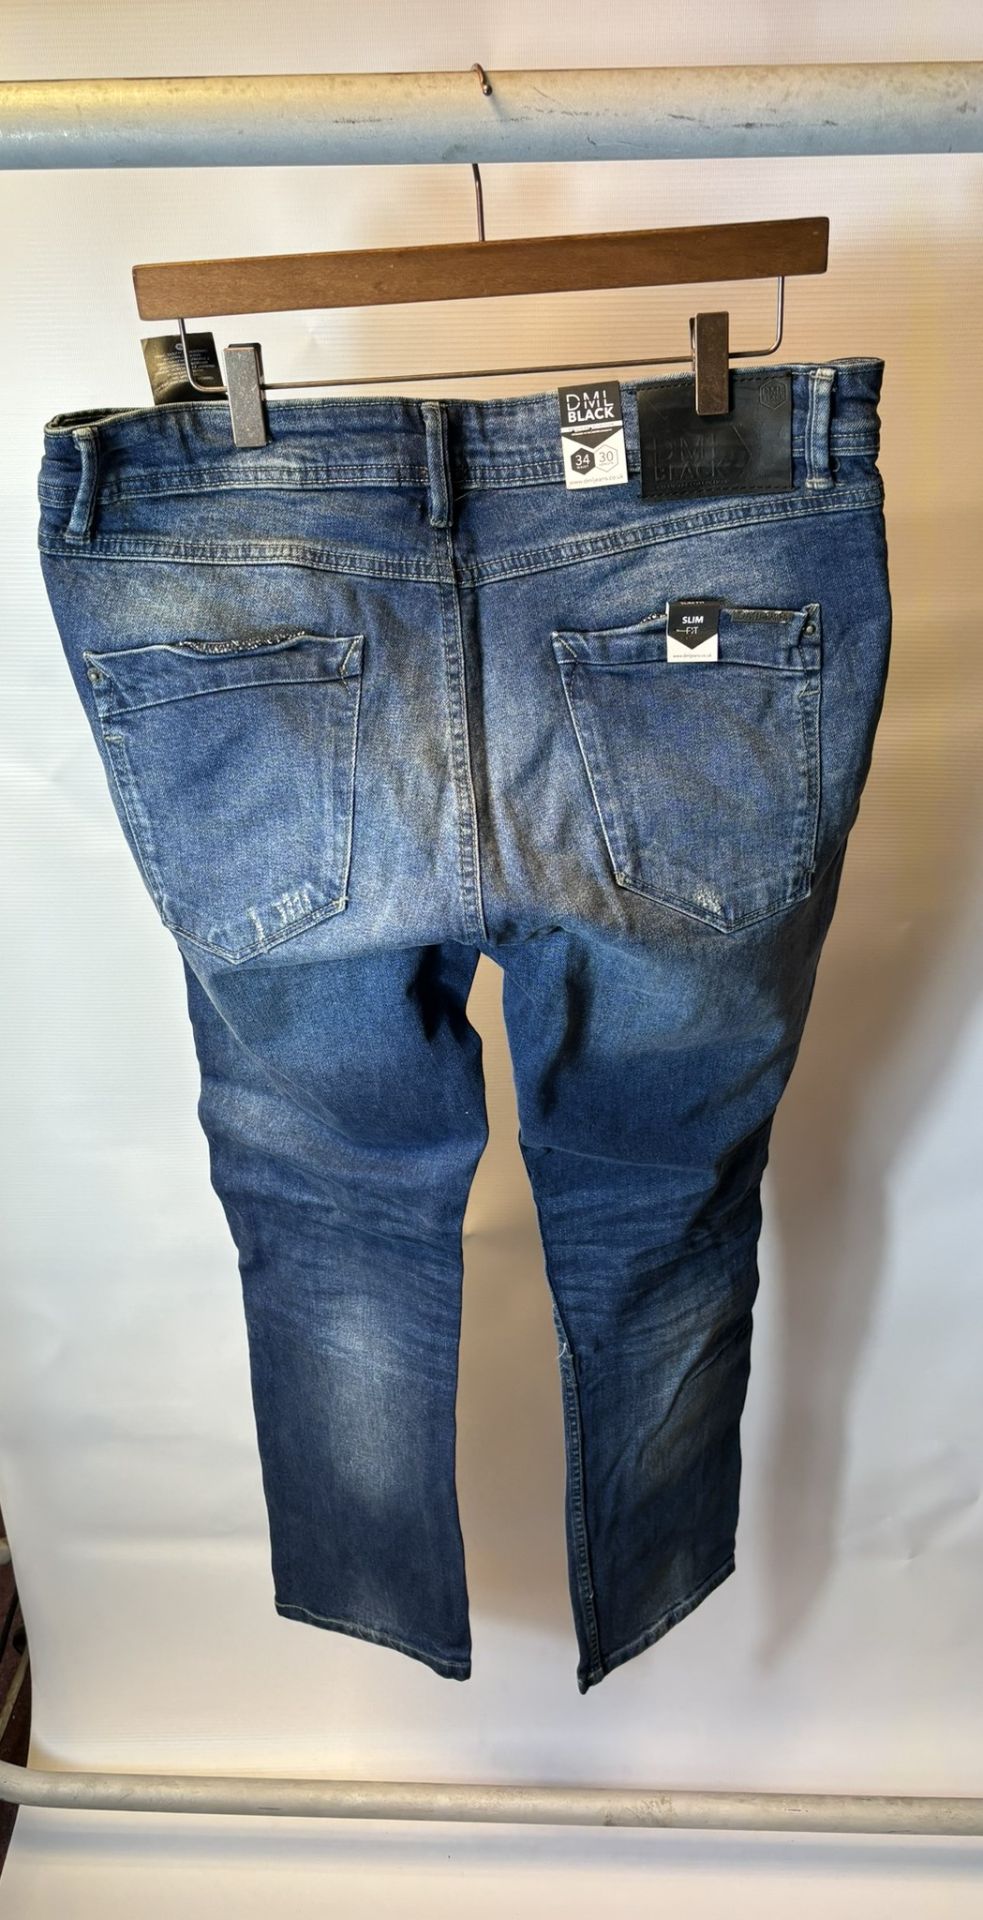 13 x Pairs Of various Sized DML Jeans Prophecy & Voyage Blue Jeans - Image 35 of 39